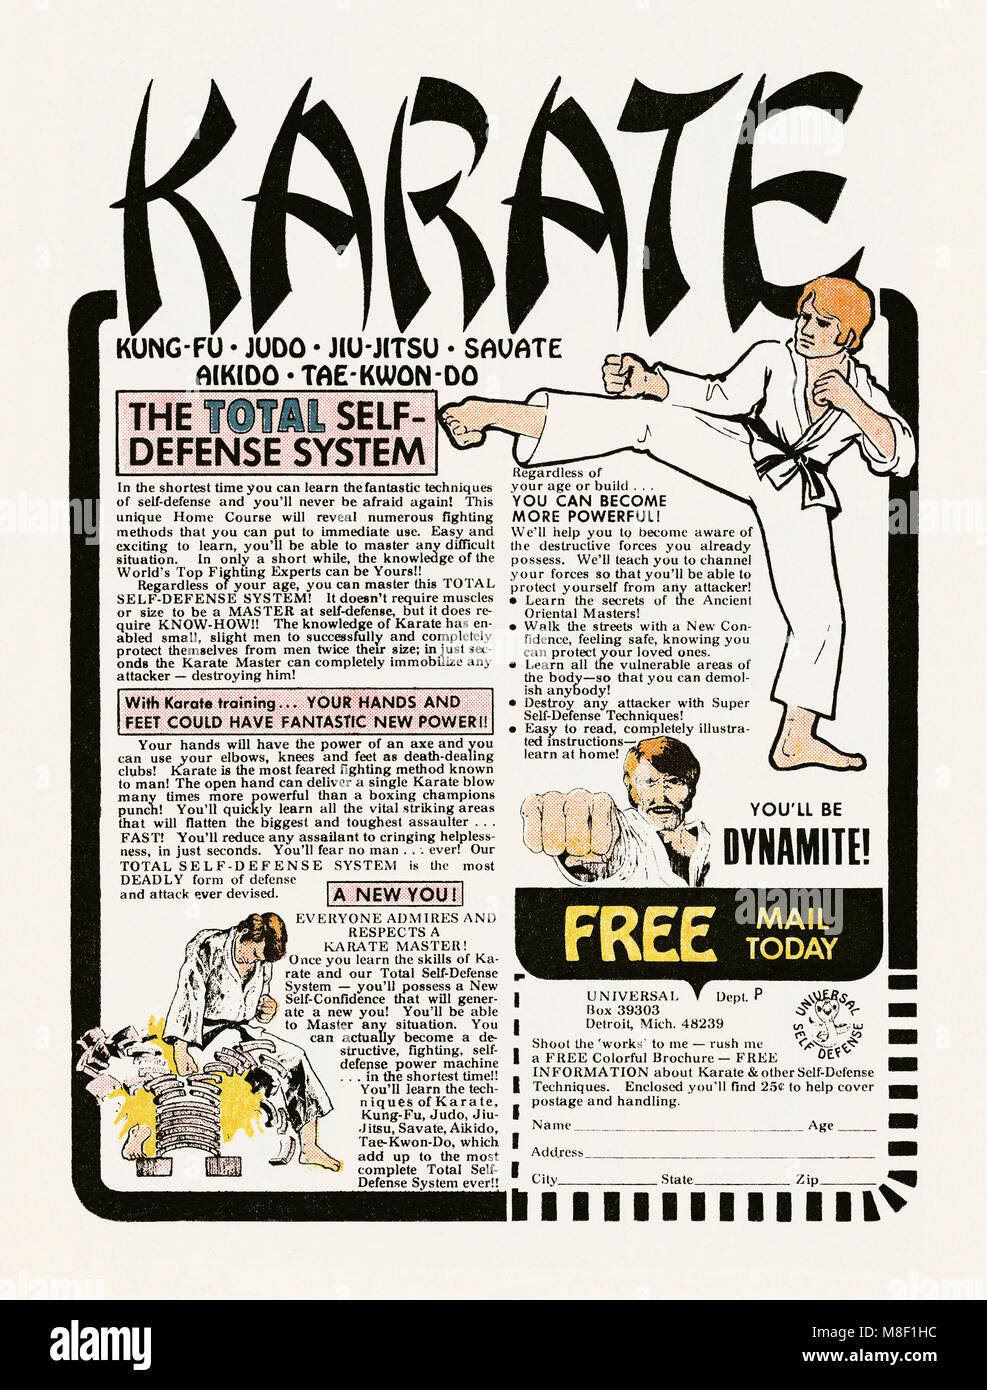 1975 advert for learning Karate and other self-defence techniques at home. It appeared in an American children's comic. Learning martial arts and enhancing fitness by using mail-order instruction books to provide an exercise programme was popular in the days before videos and the internet Stock Photo